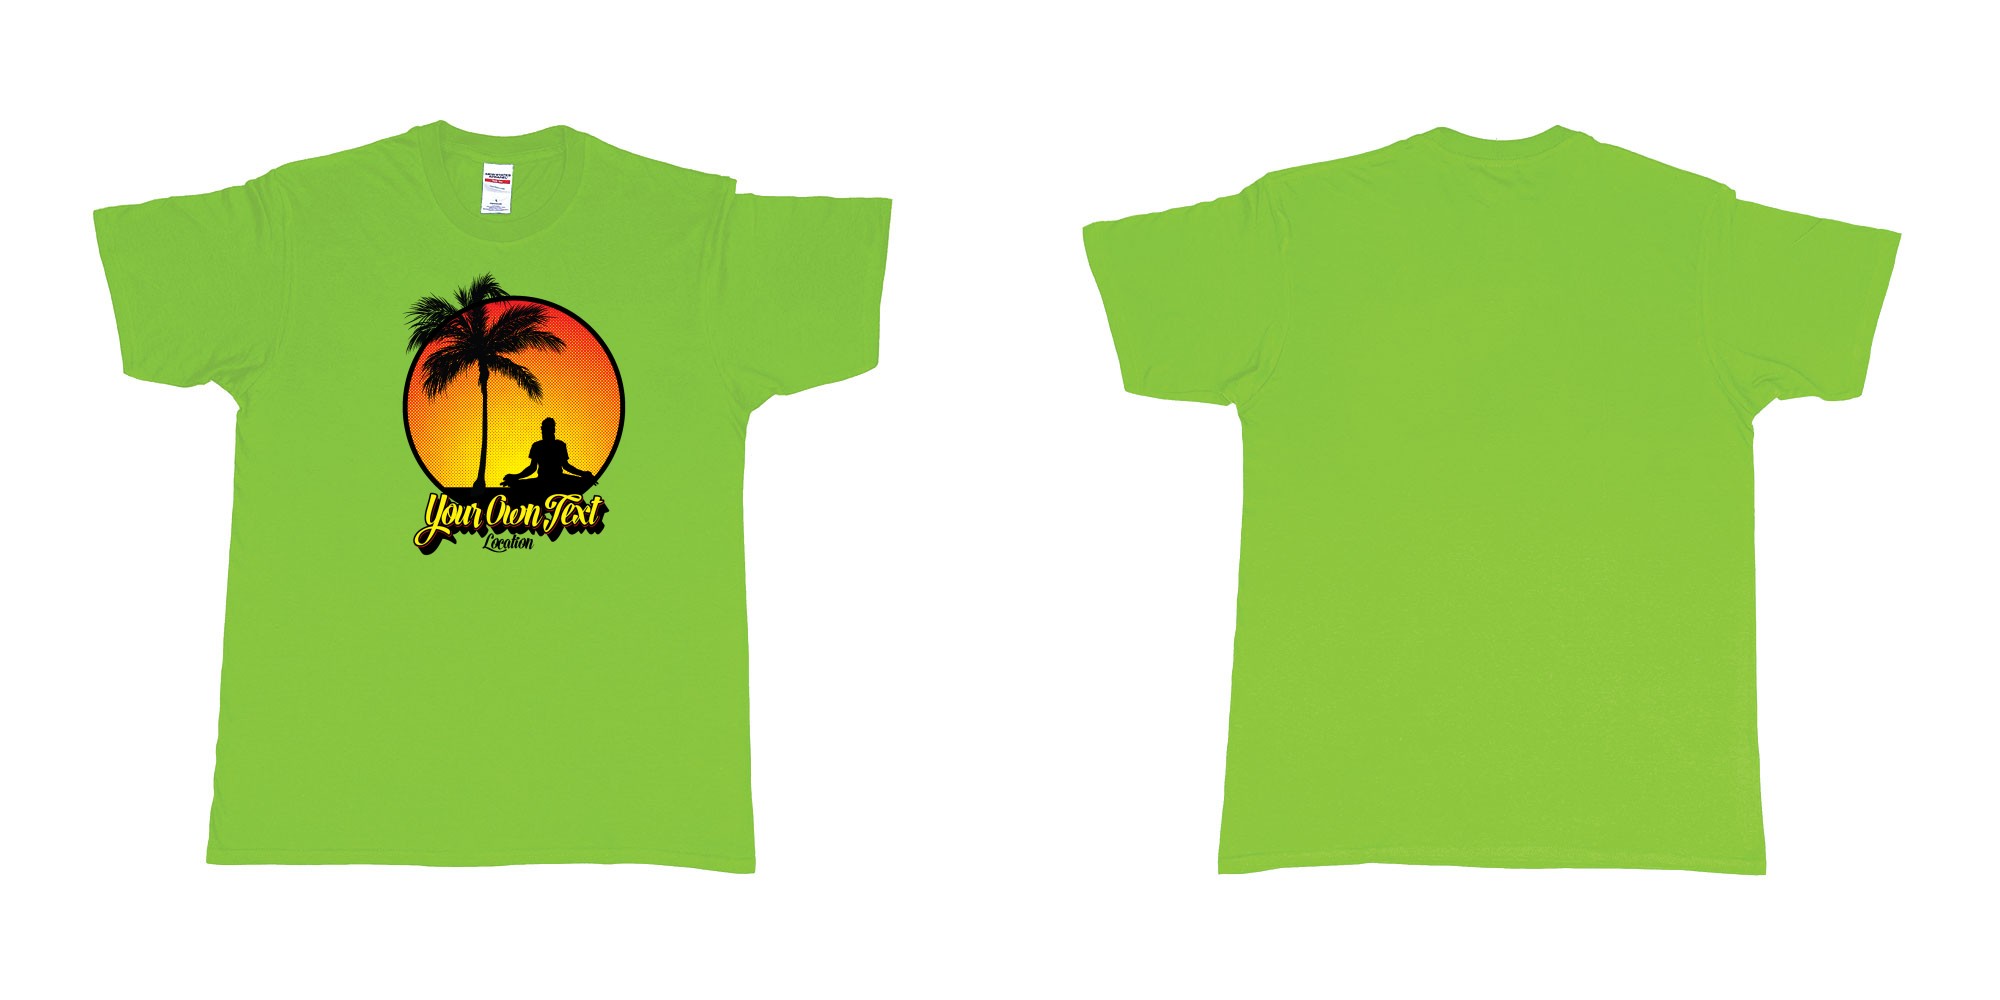 Custom tshirt design yoga palmtree sunset halftone your own text location screen printing bali in fabric color lime choice your own text made in Bali by The Pirate Way